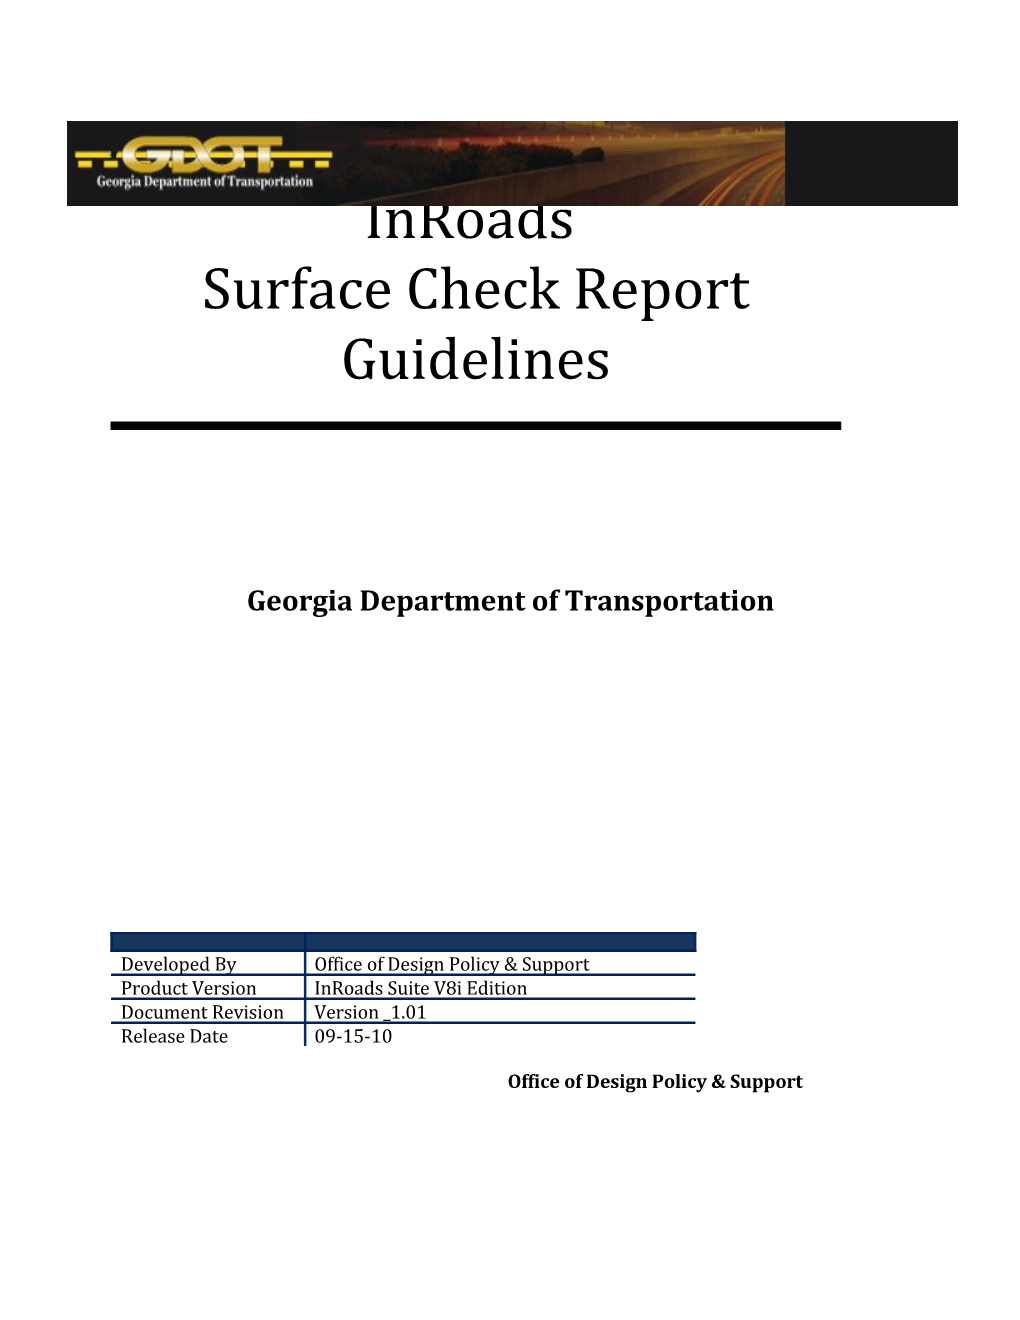 Surface Check Report Guidelines V1.0